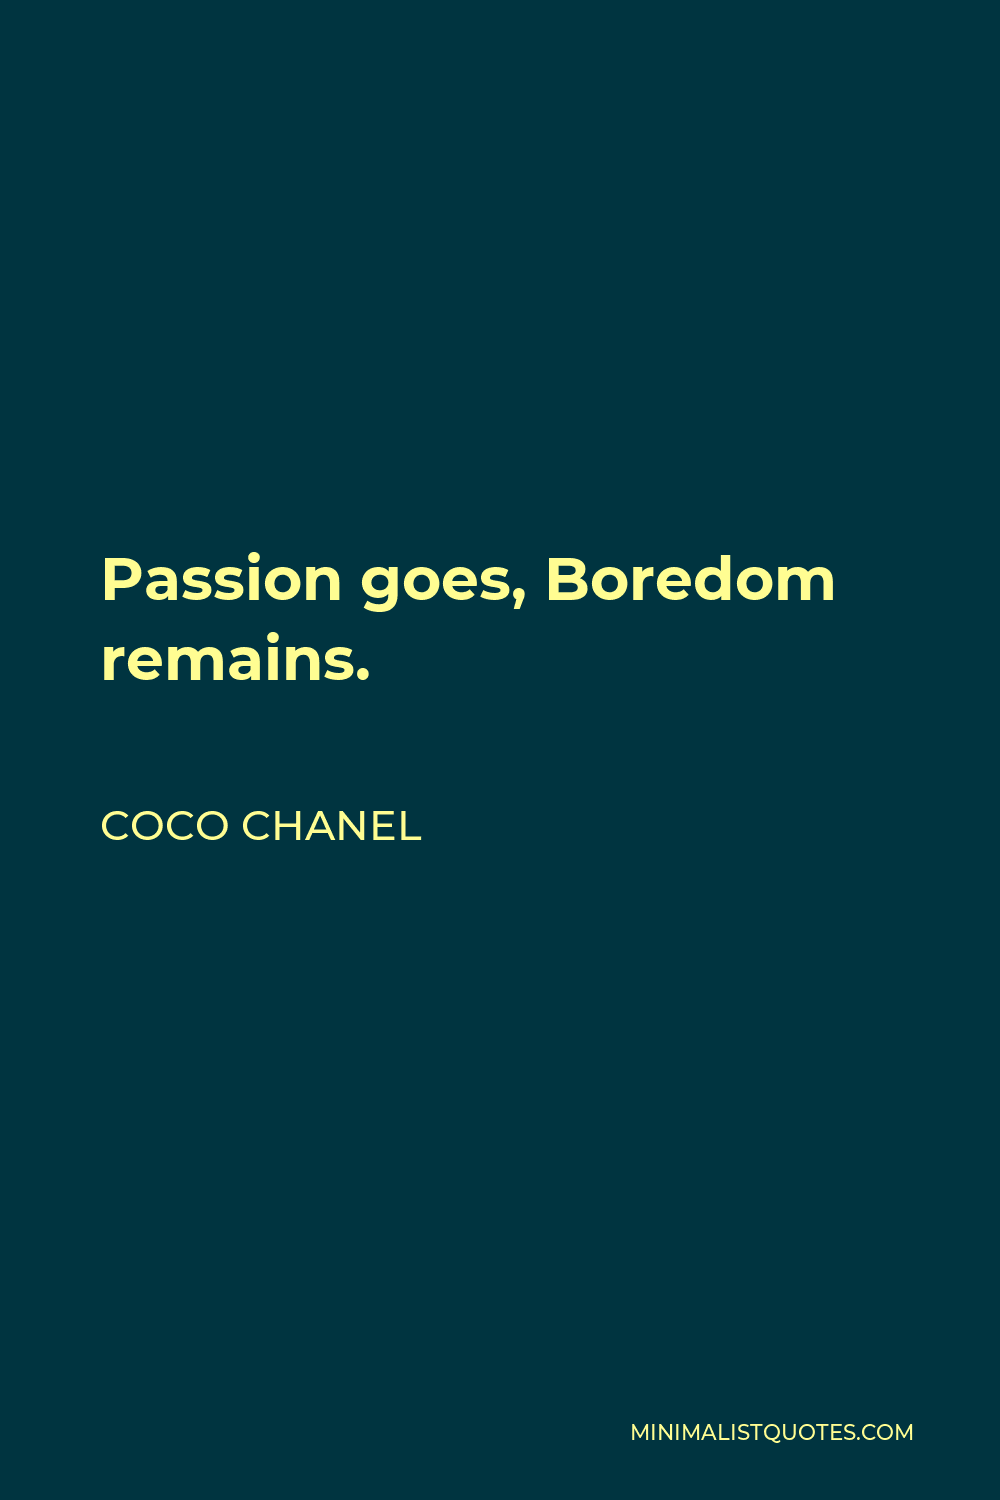 Coco Chanel Quote - Passion goes, Boredom remains.